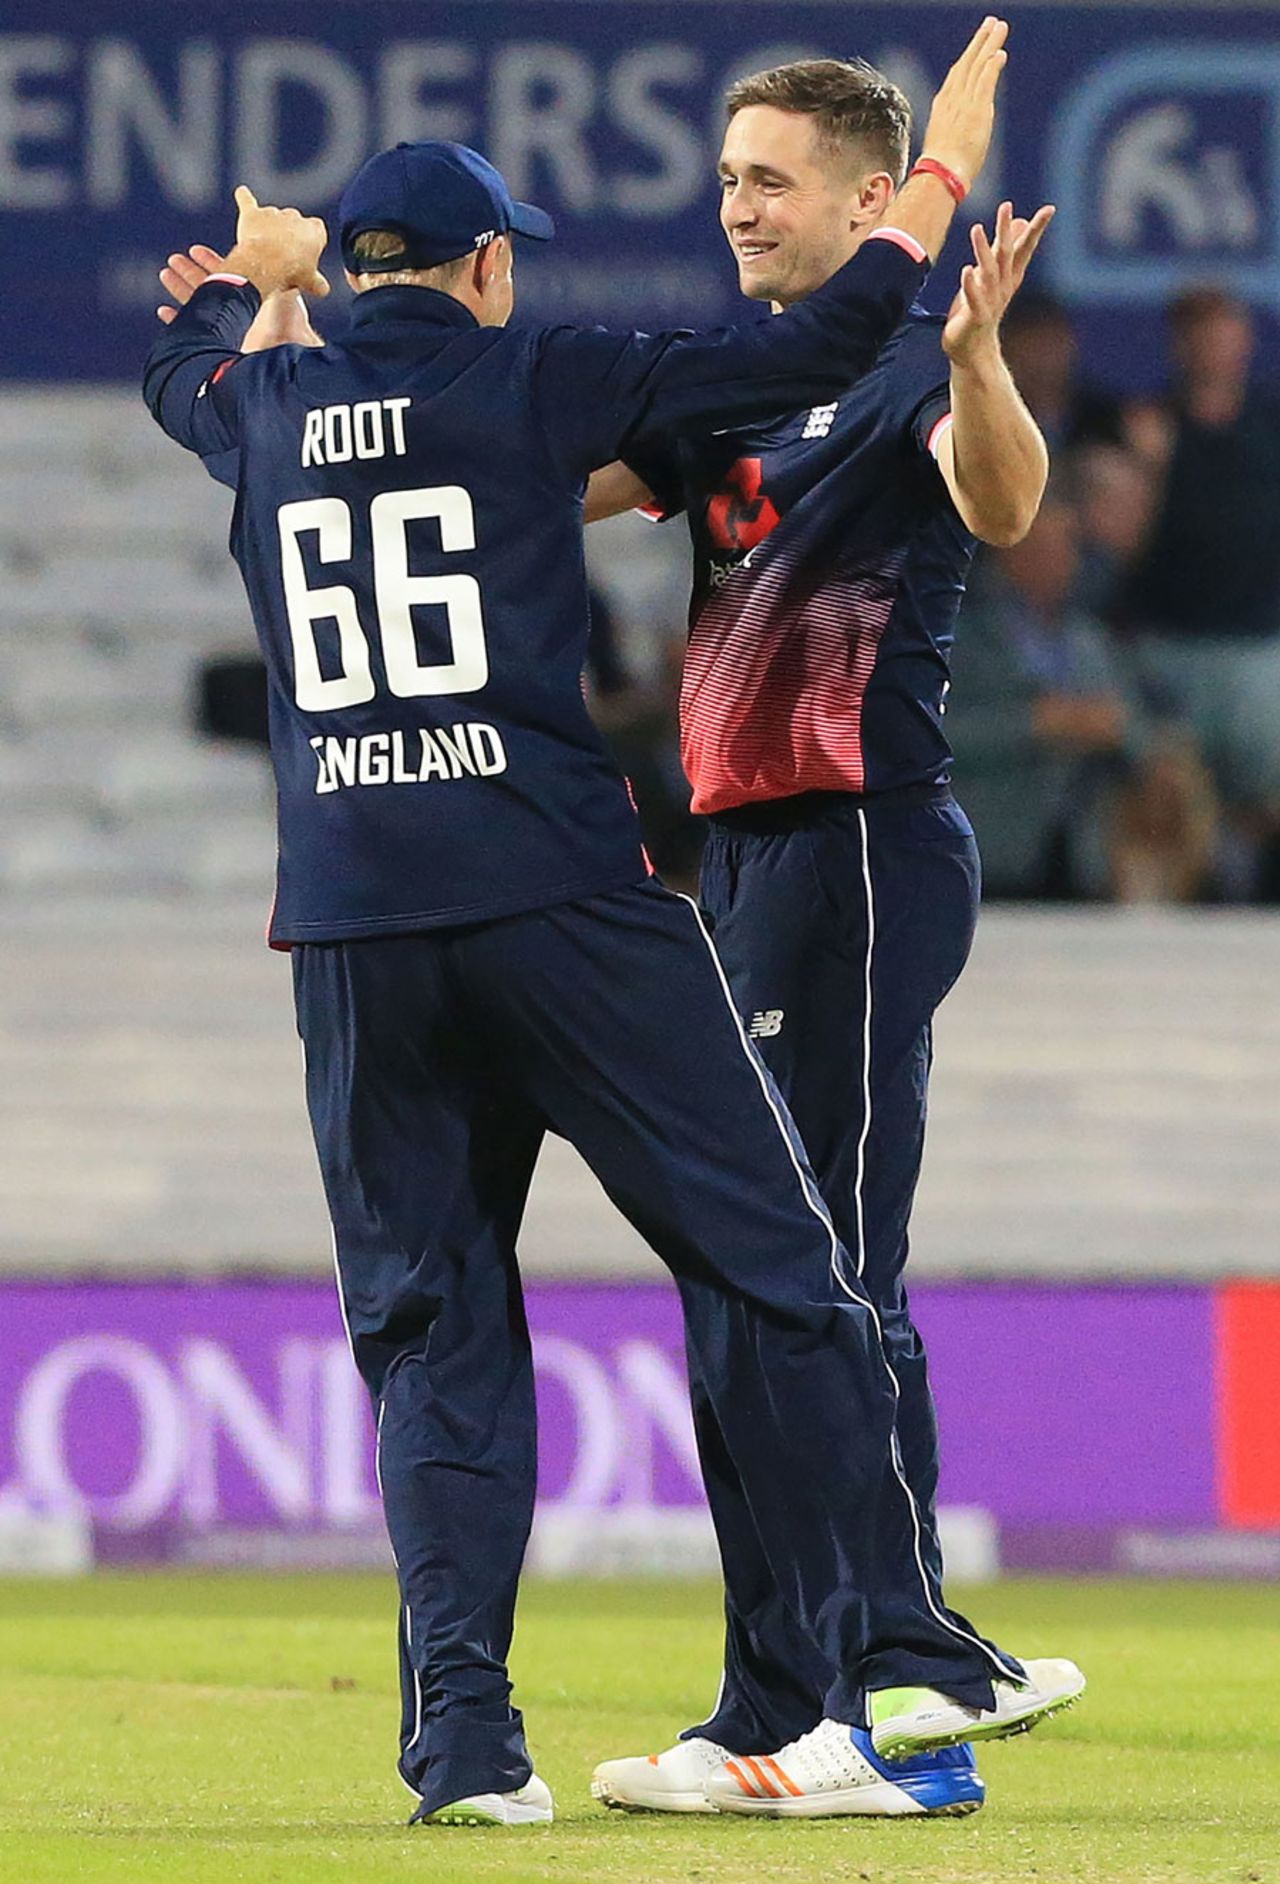 Chris Woakes finished with a four-wicket haul, England v South Africa, 1st ODI, Headingley, May 24, 2017